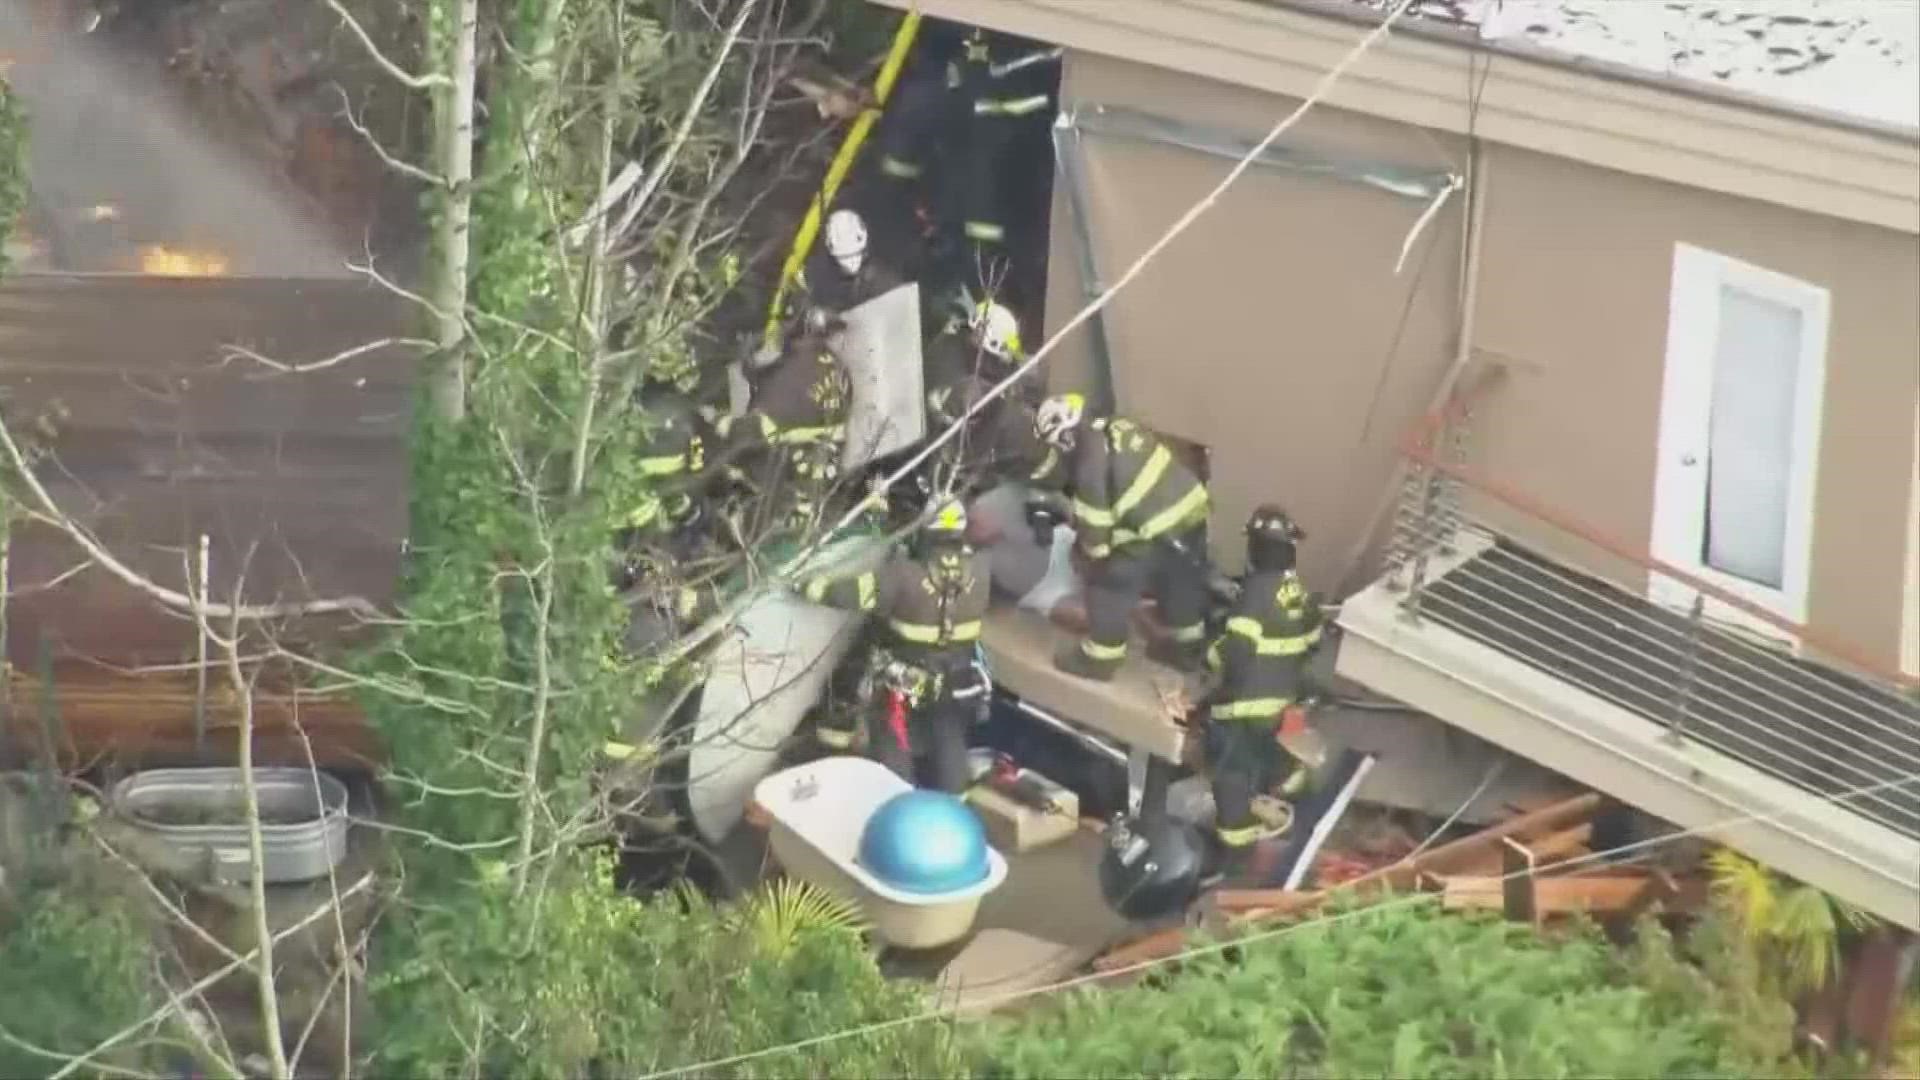 A woman inside the house was able to escape on her own. One dog died and another dog is still unaccounted for, according to the Seattle Fire Department.